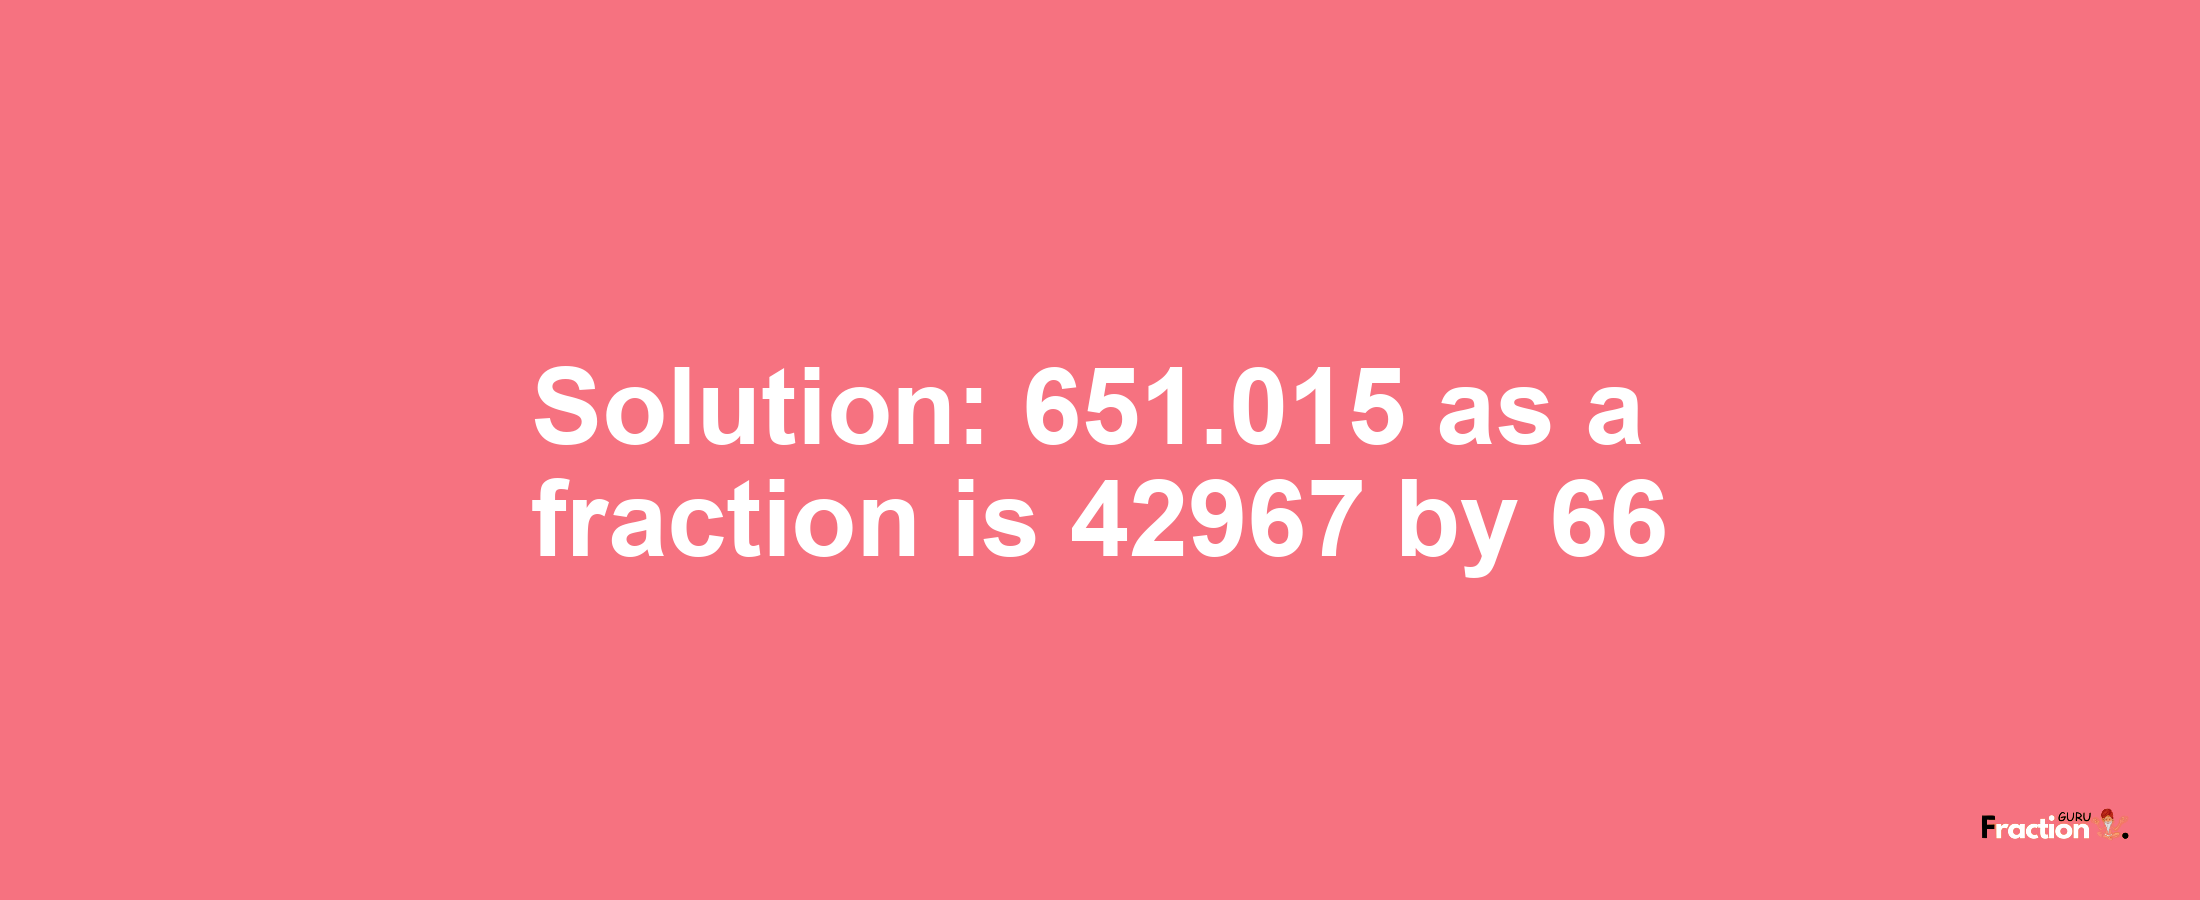 Solution:651.015 as a fraction is 42967/66